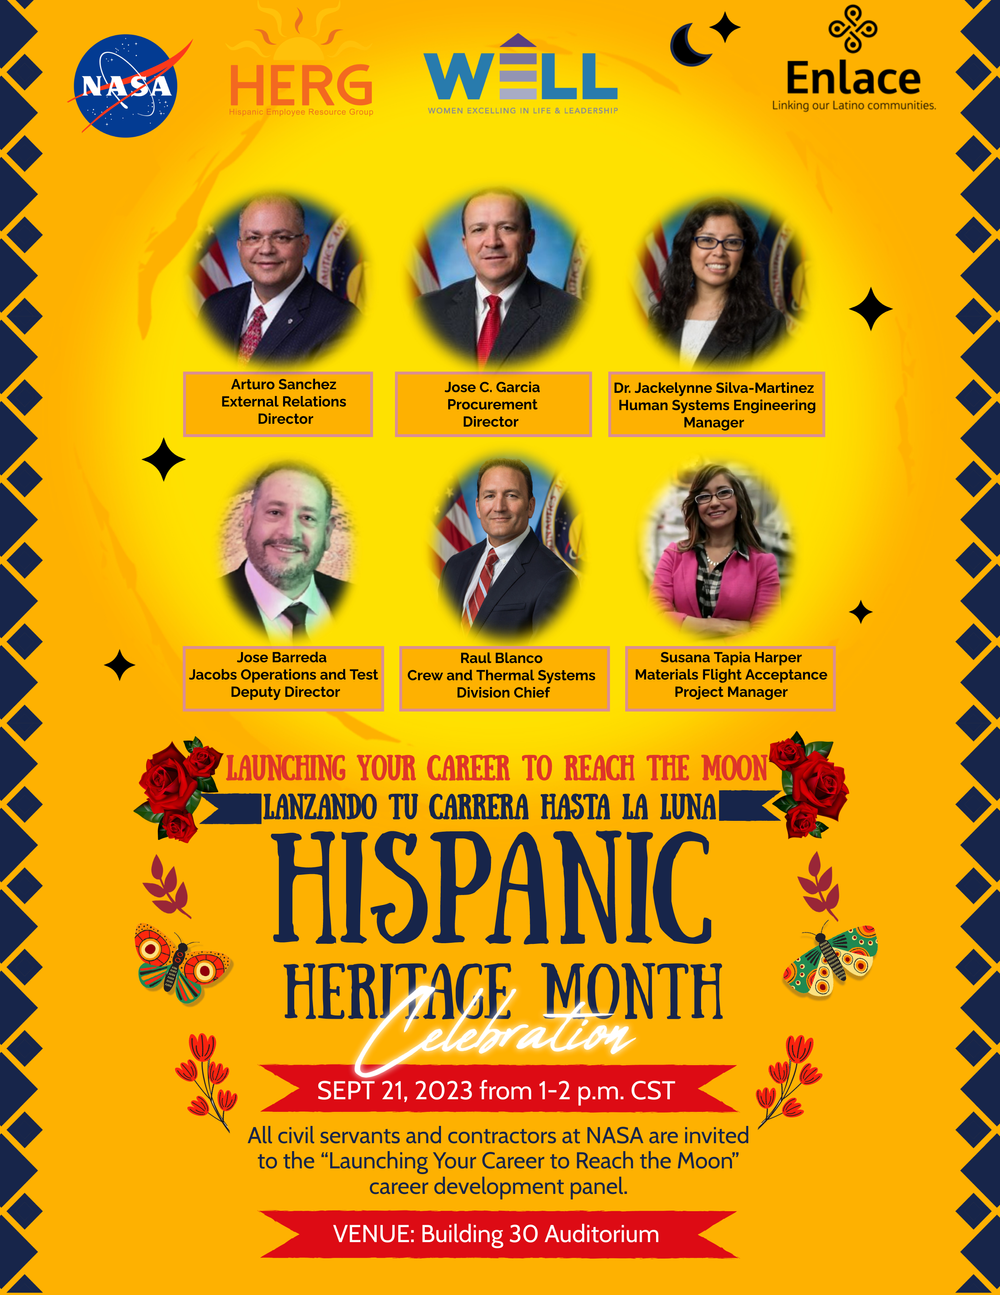 Hispanic Employee Resource Group and Women Excelling in Life and Leadership will host a Hispanic Heritage Month celebration featuring a career panel with special guests on September 21 from 1 - 2 p.m. in the Building 30 Auditorium.